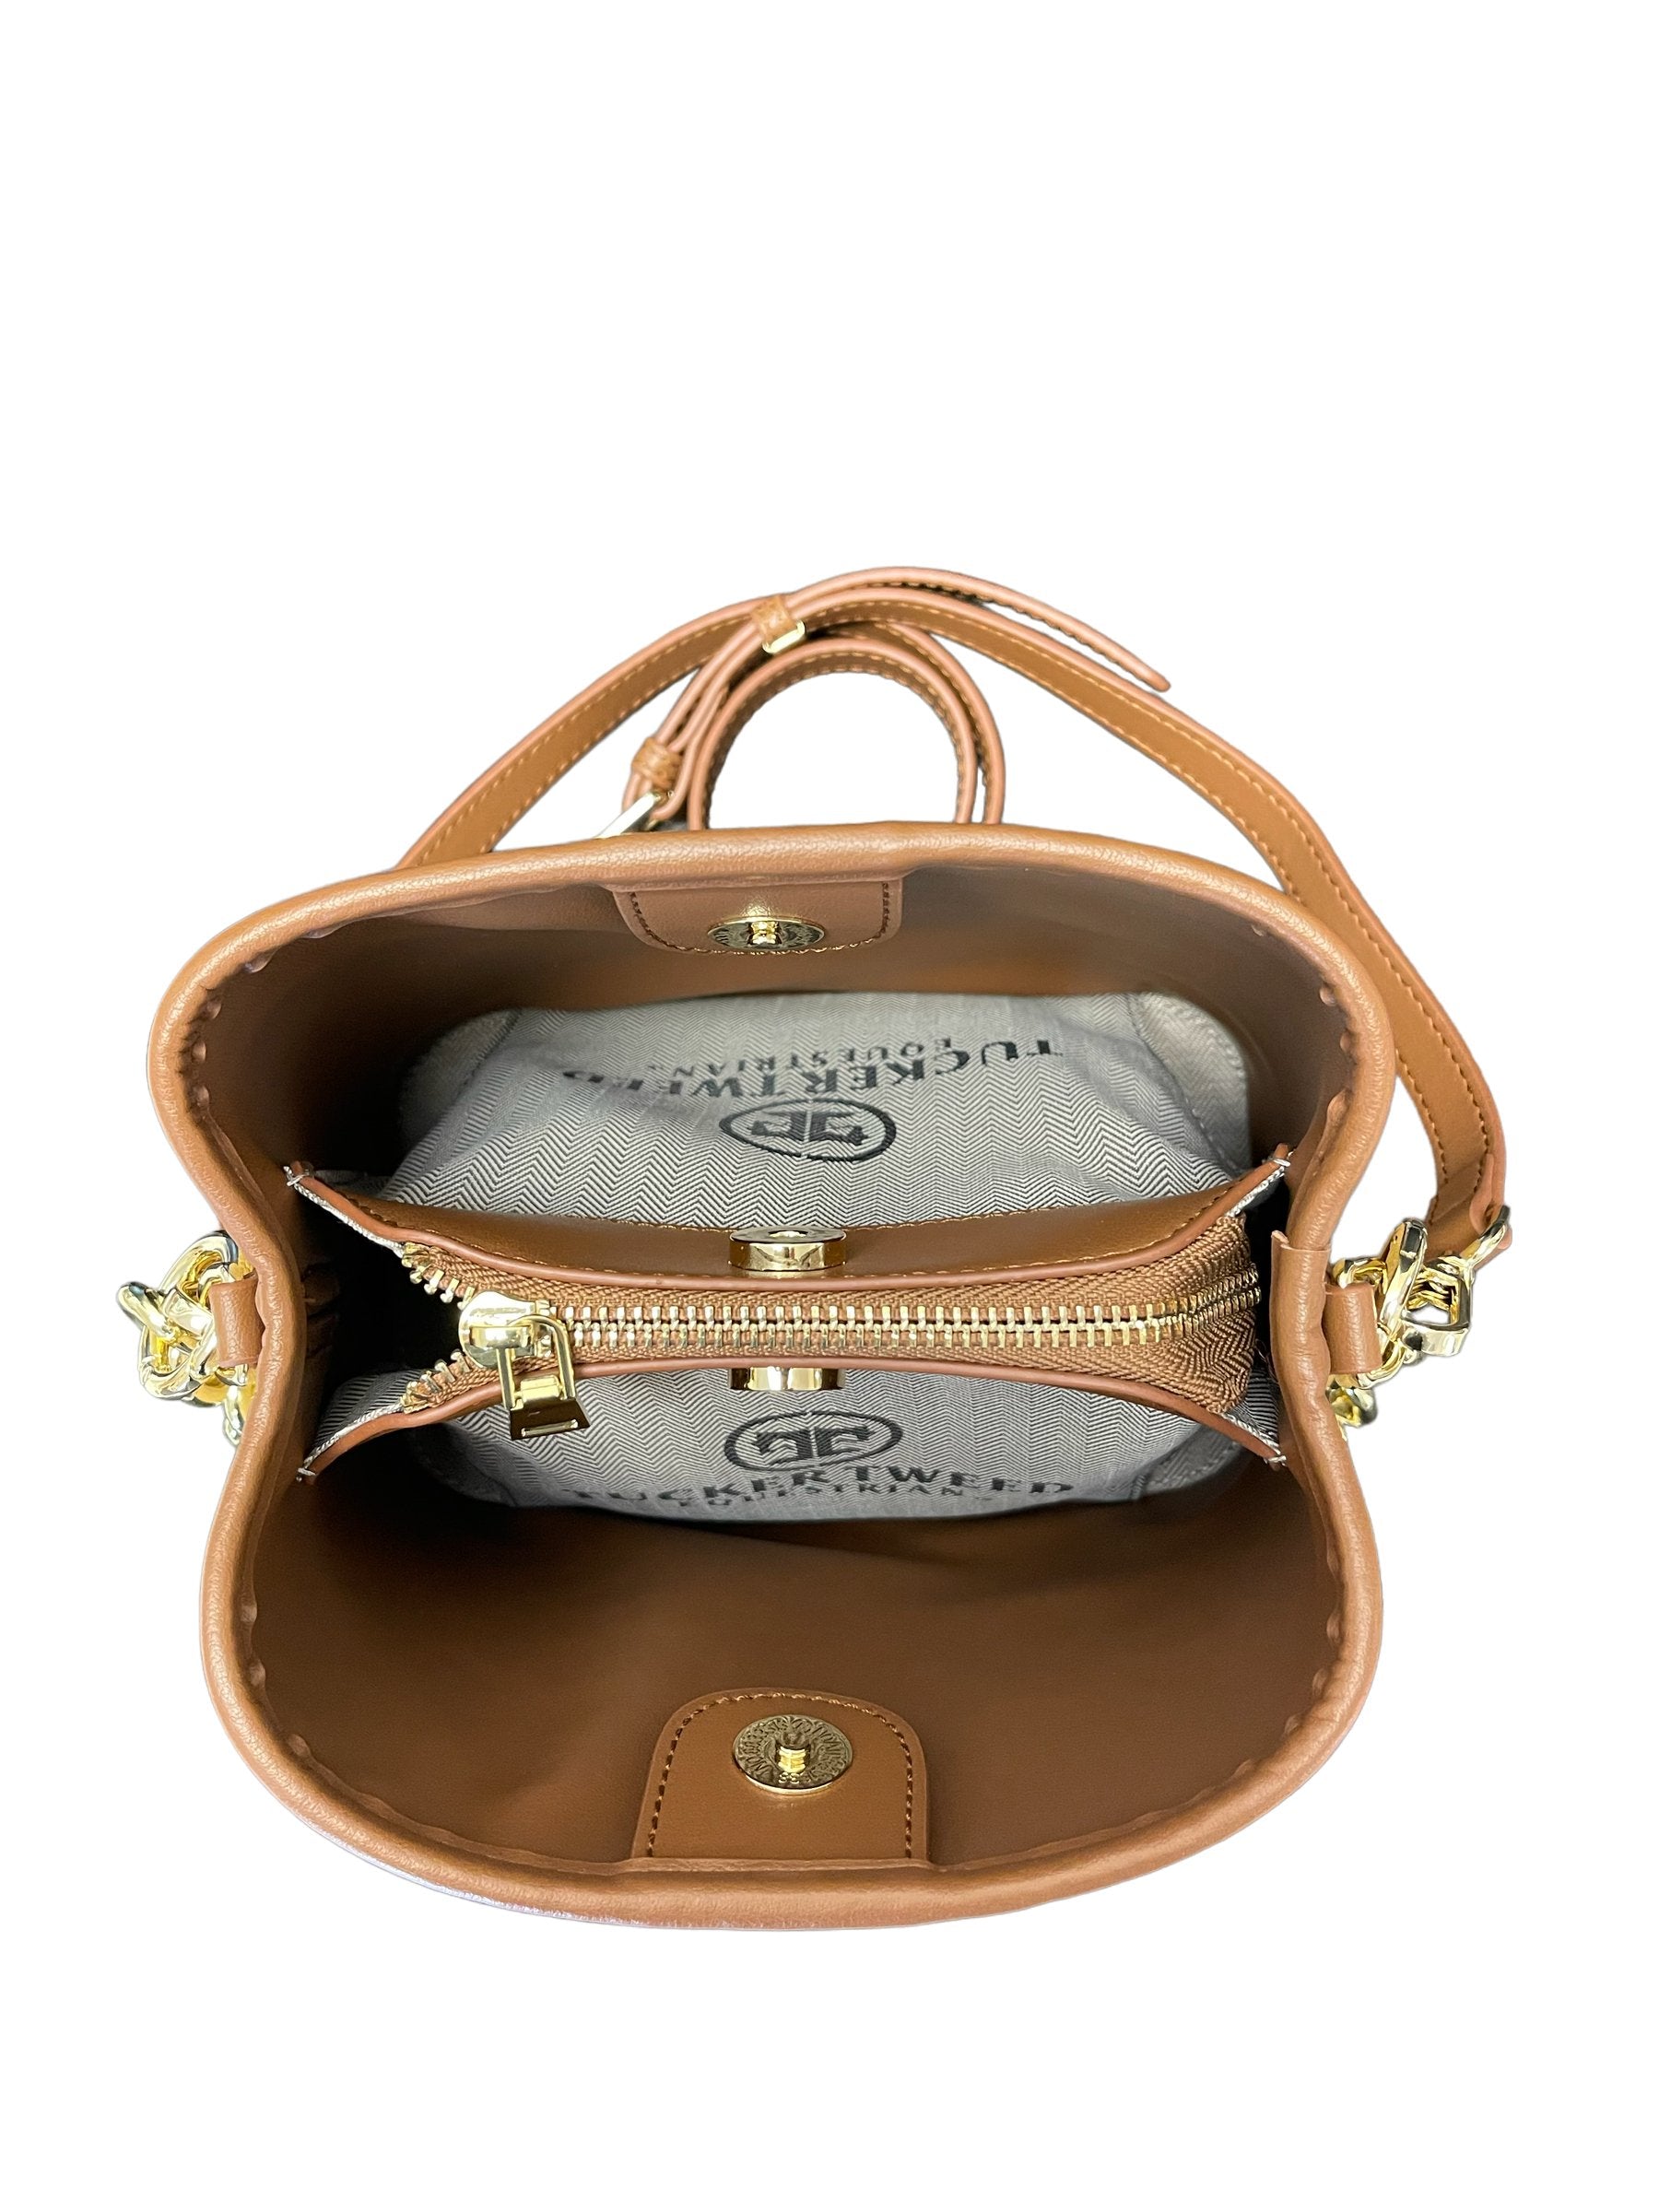 Tucker Tweed 'Shetland' Limited Edition Purse - Equiluxe Tack